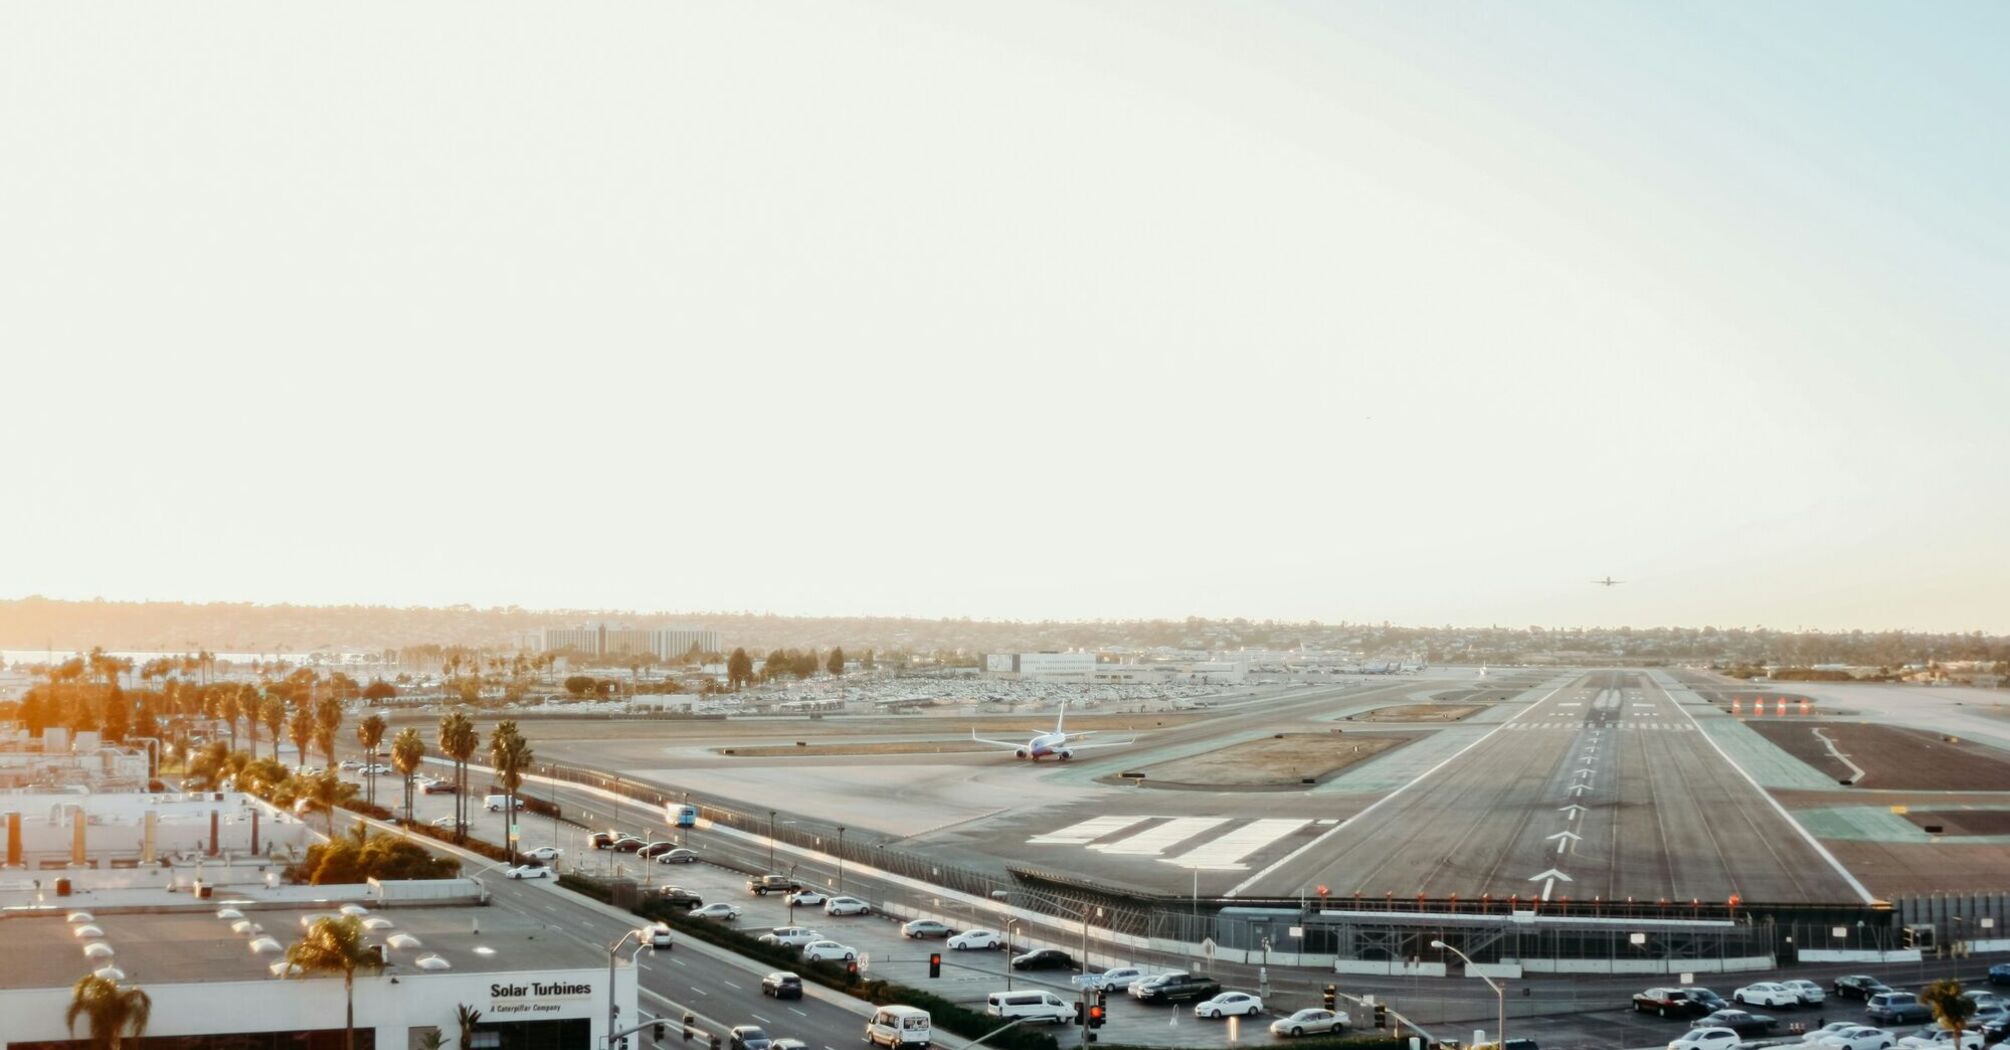 View of San Diego International Airport